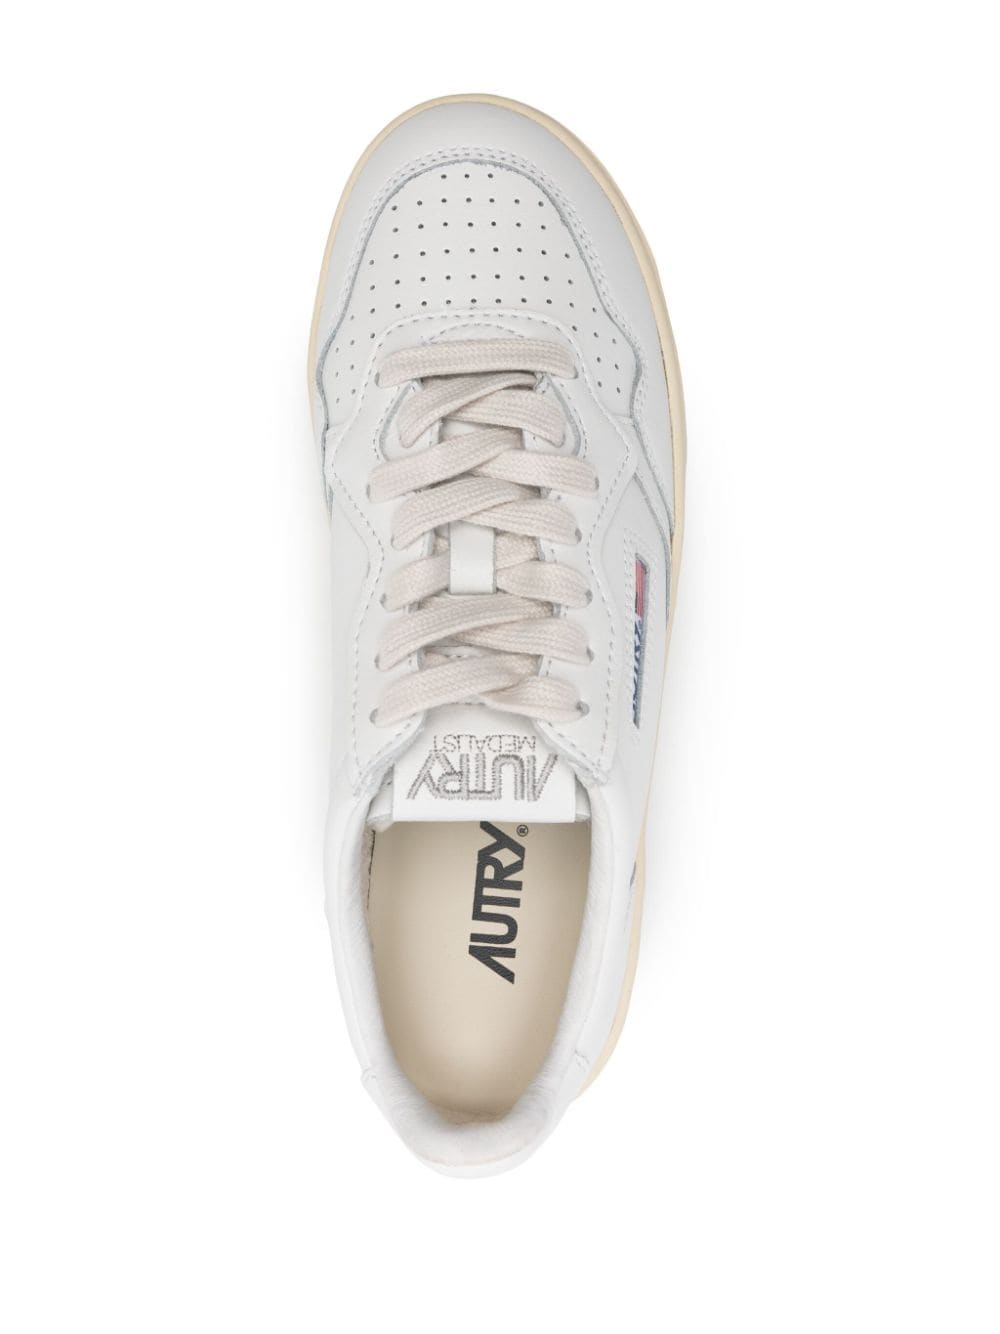 Medalist sneakers with raised sole